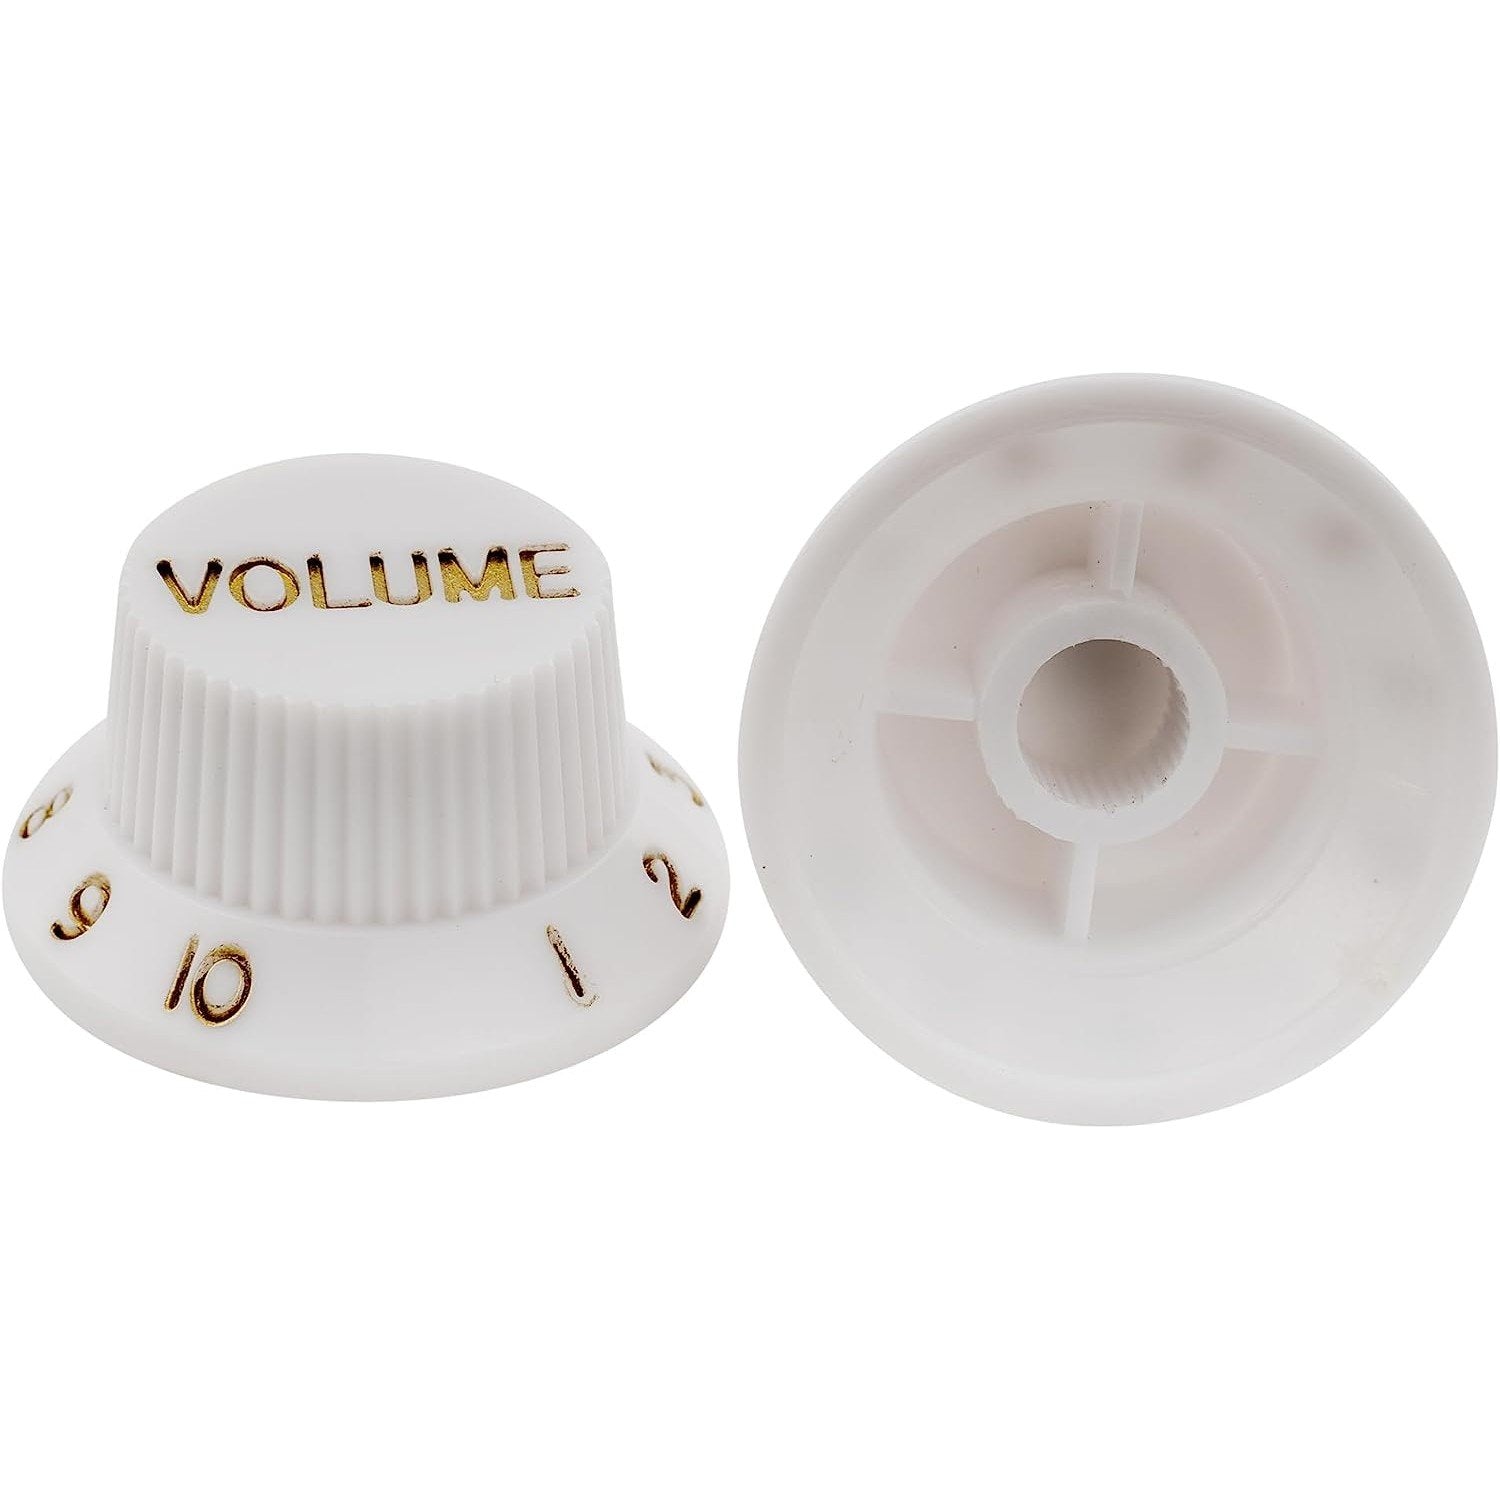 Metric Control Guitar Knobs for Strat